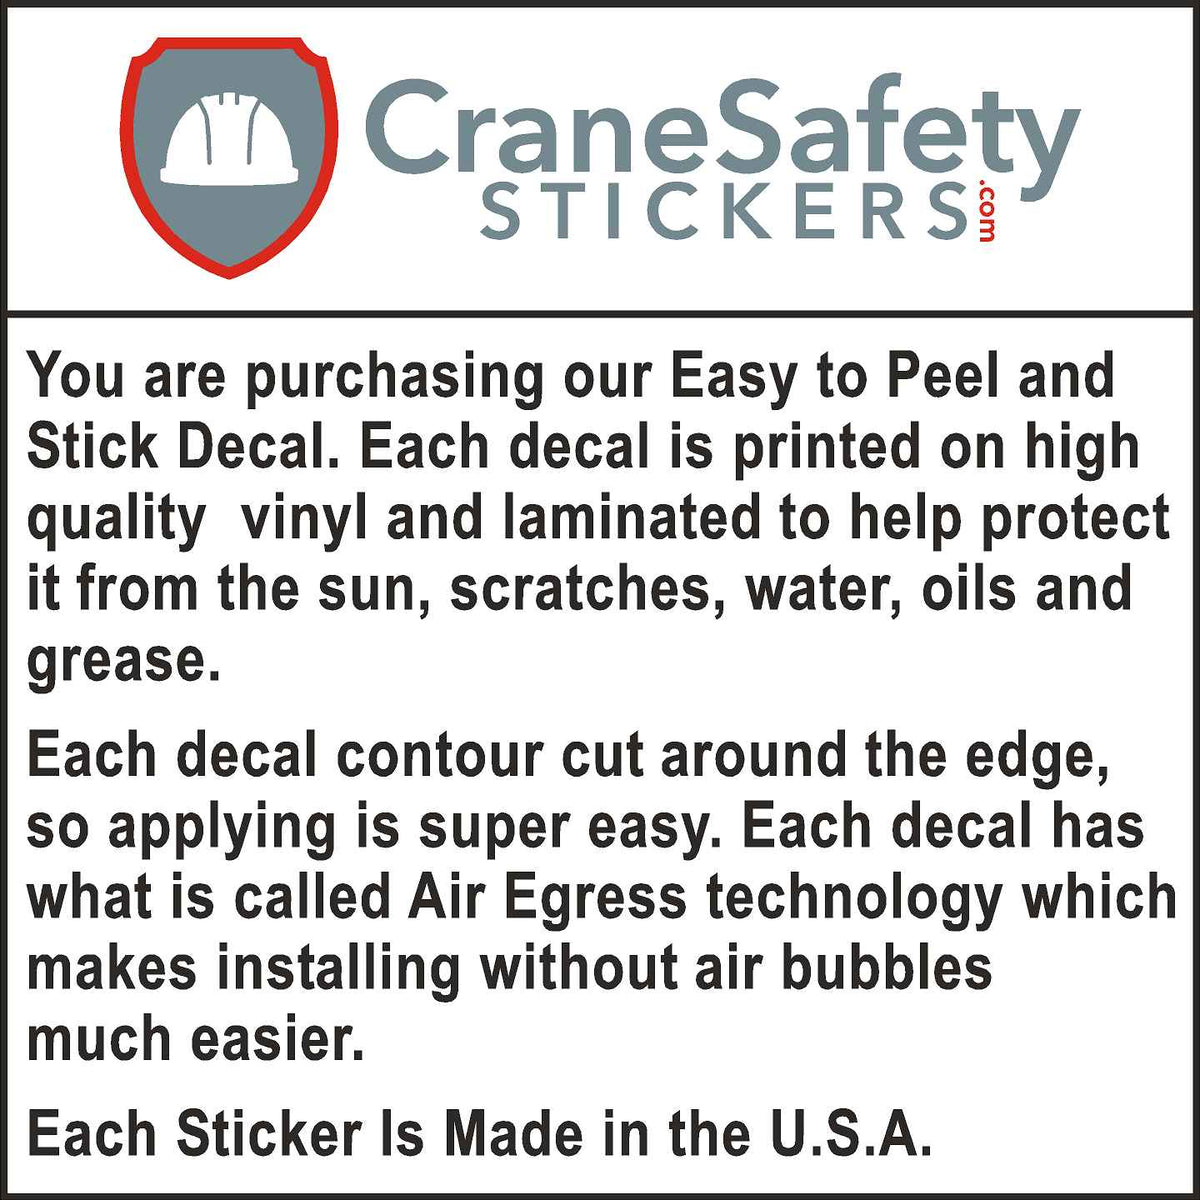 Description of the quality of our one year injury free sticker.